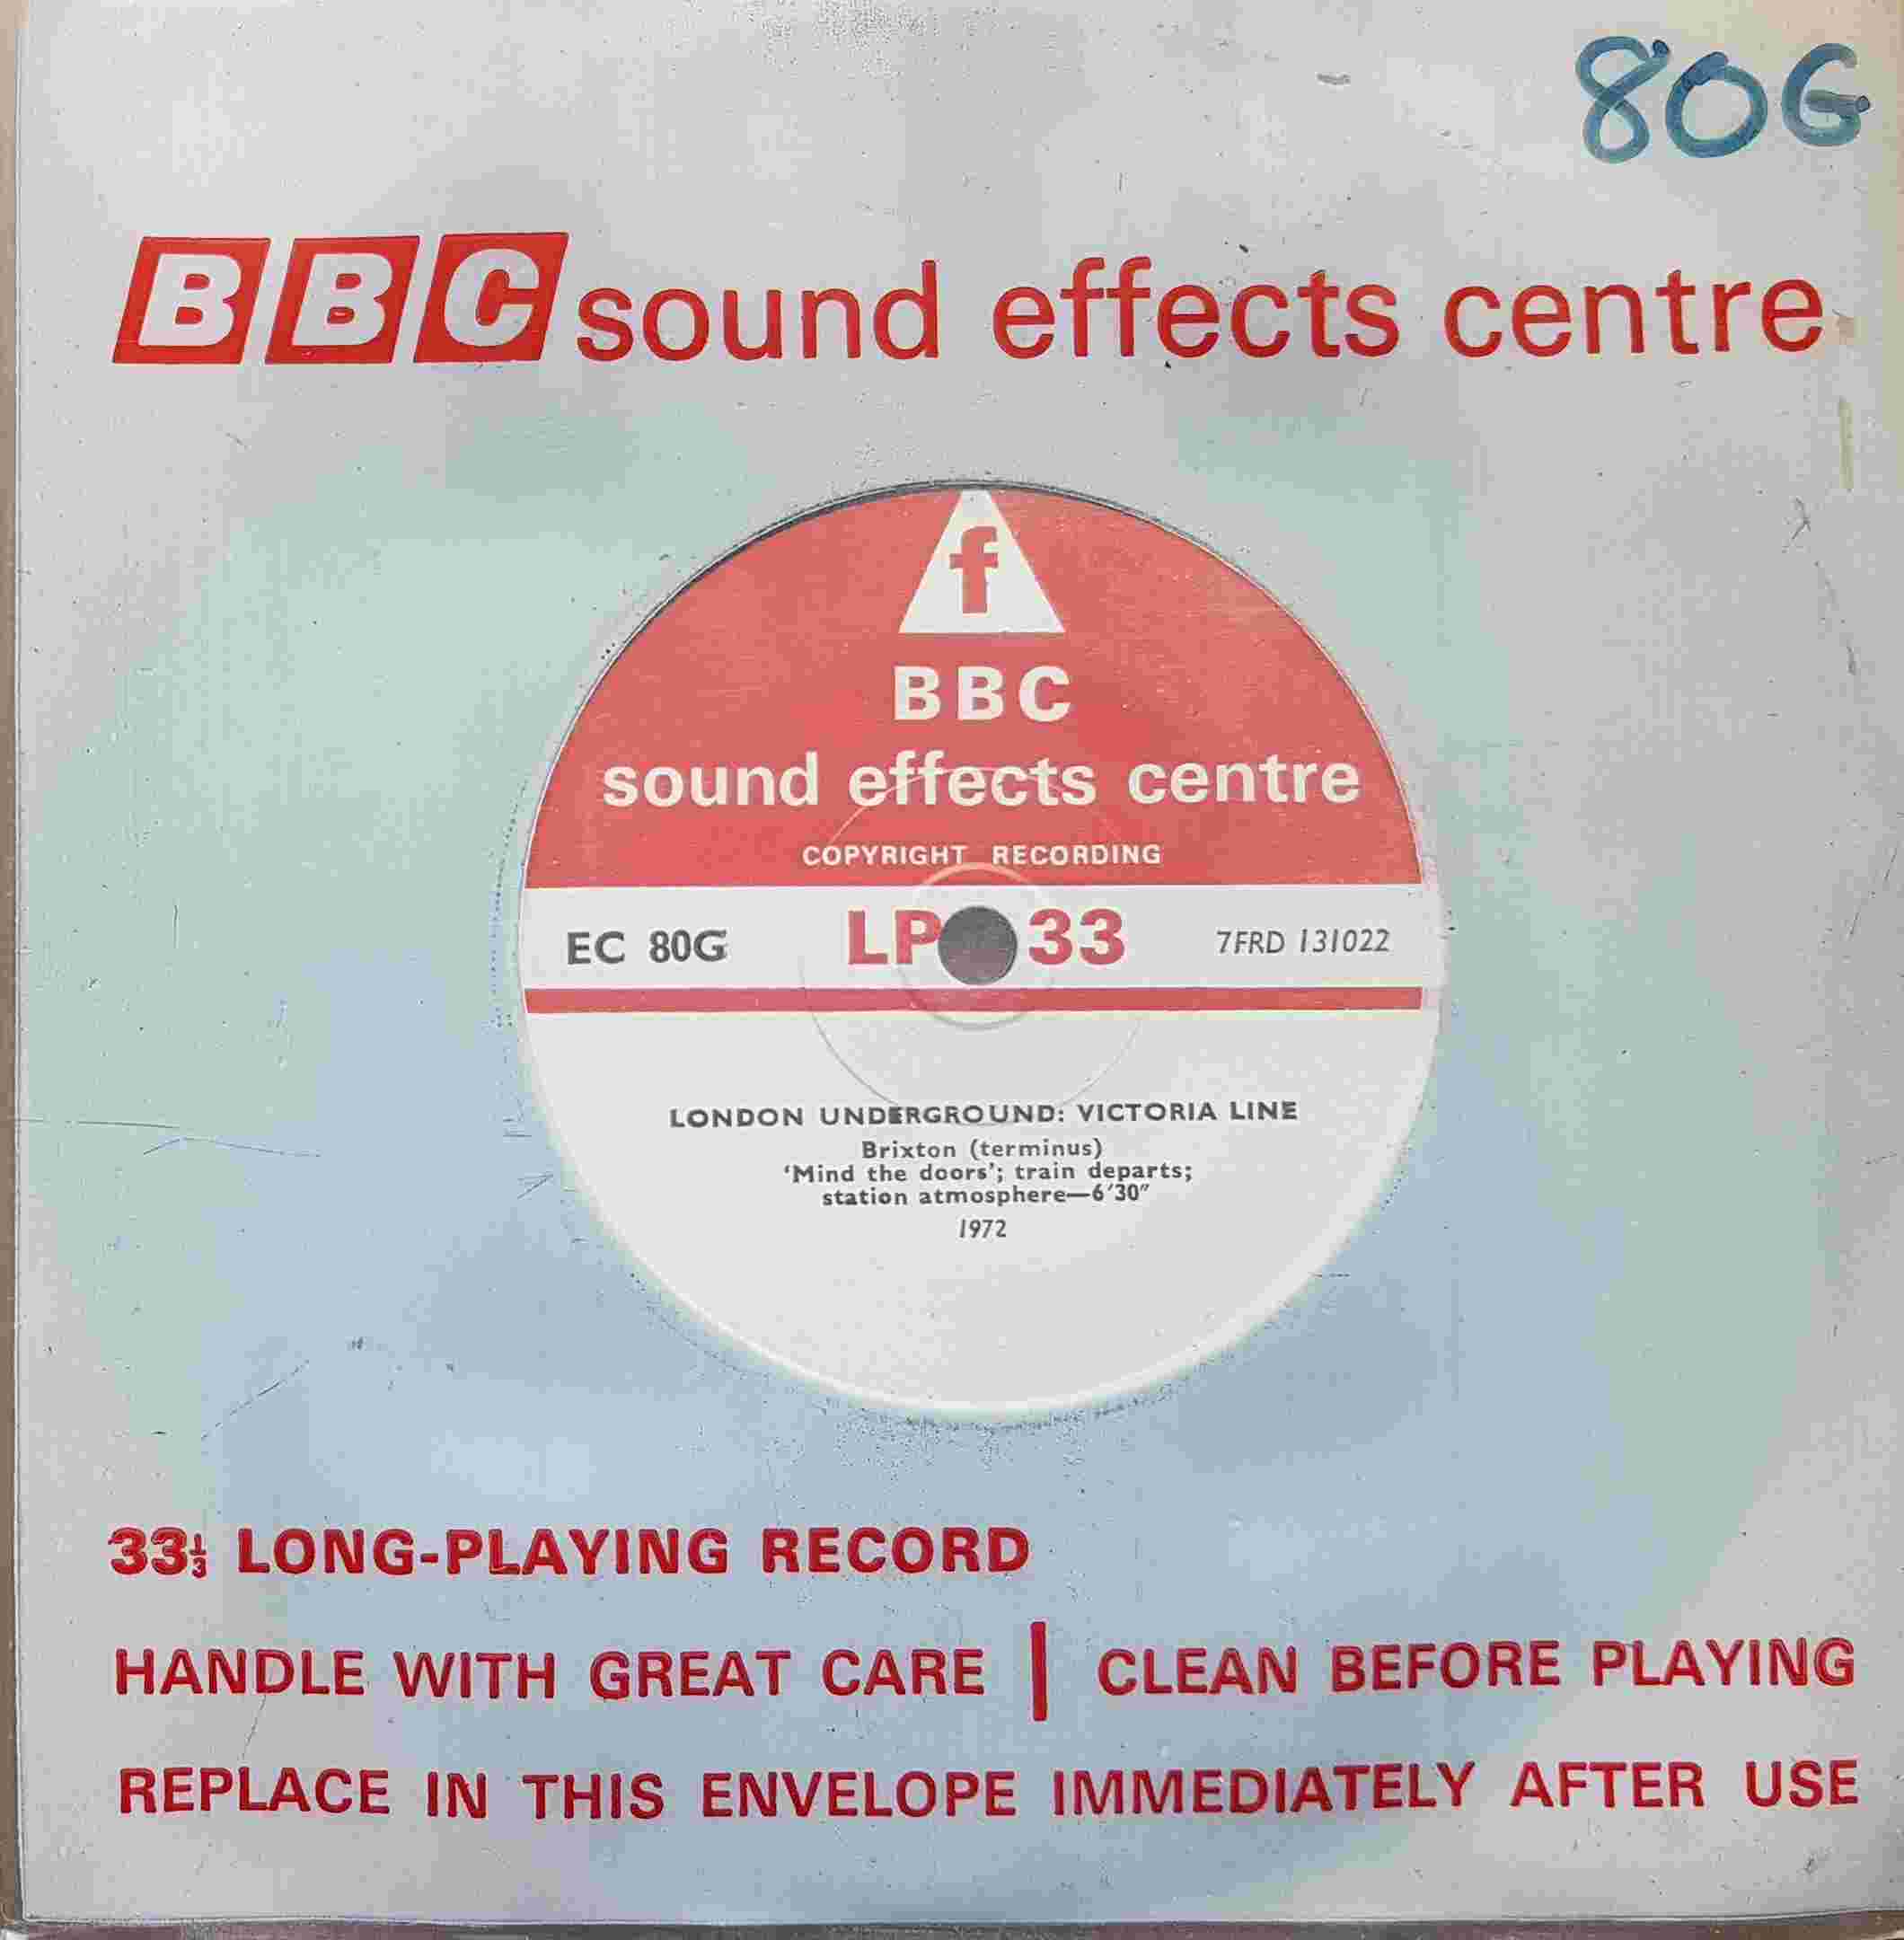 Picture of EC 80G London Underground - Victoria Line by artist Not registered from the BBC singles - Records and Tapes library